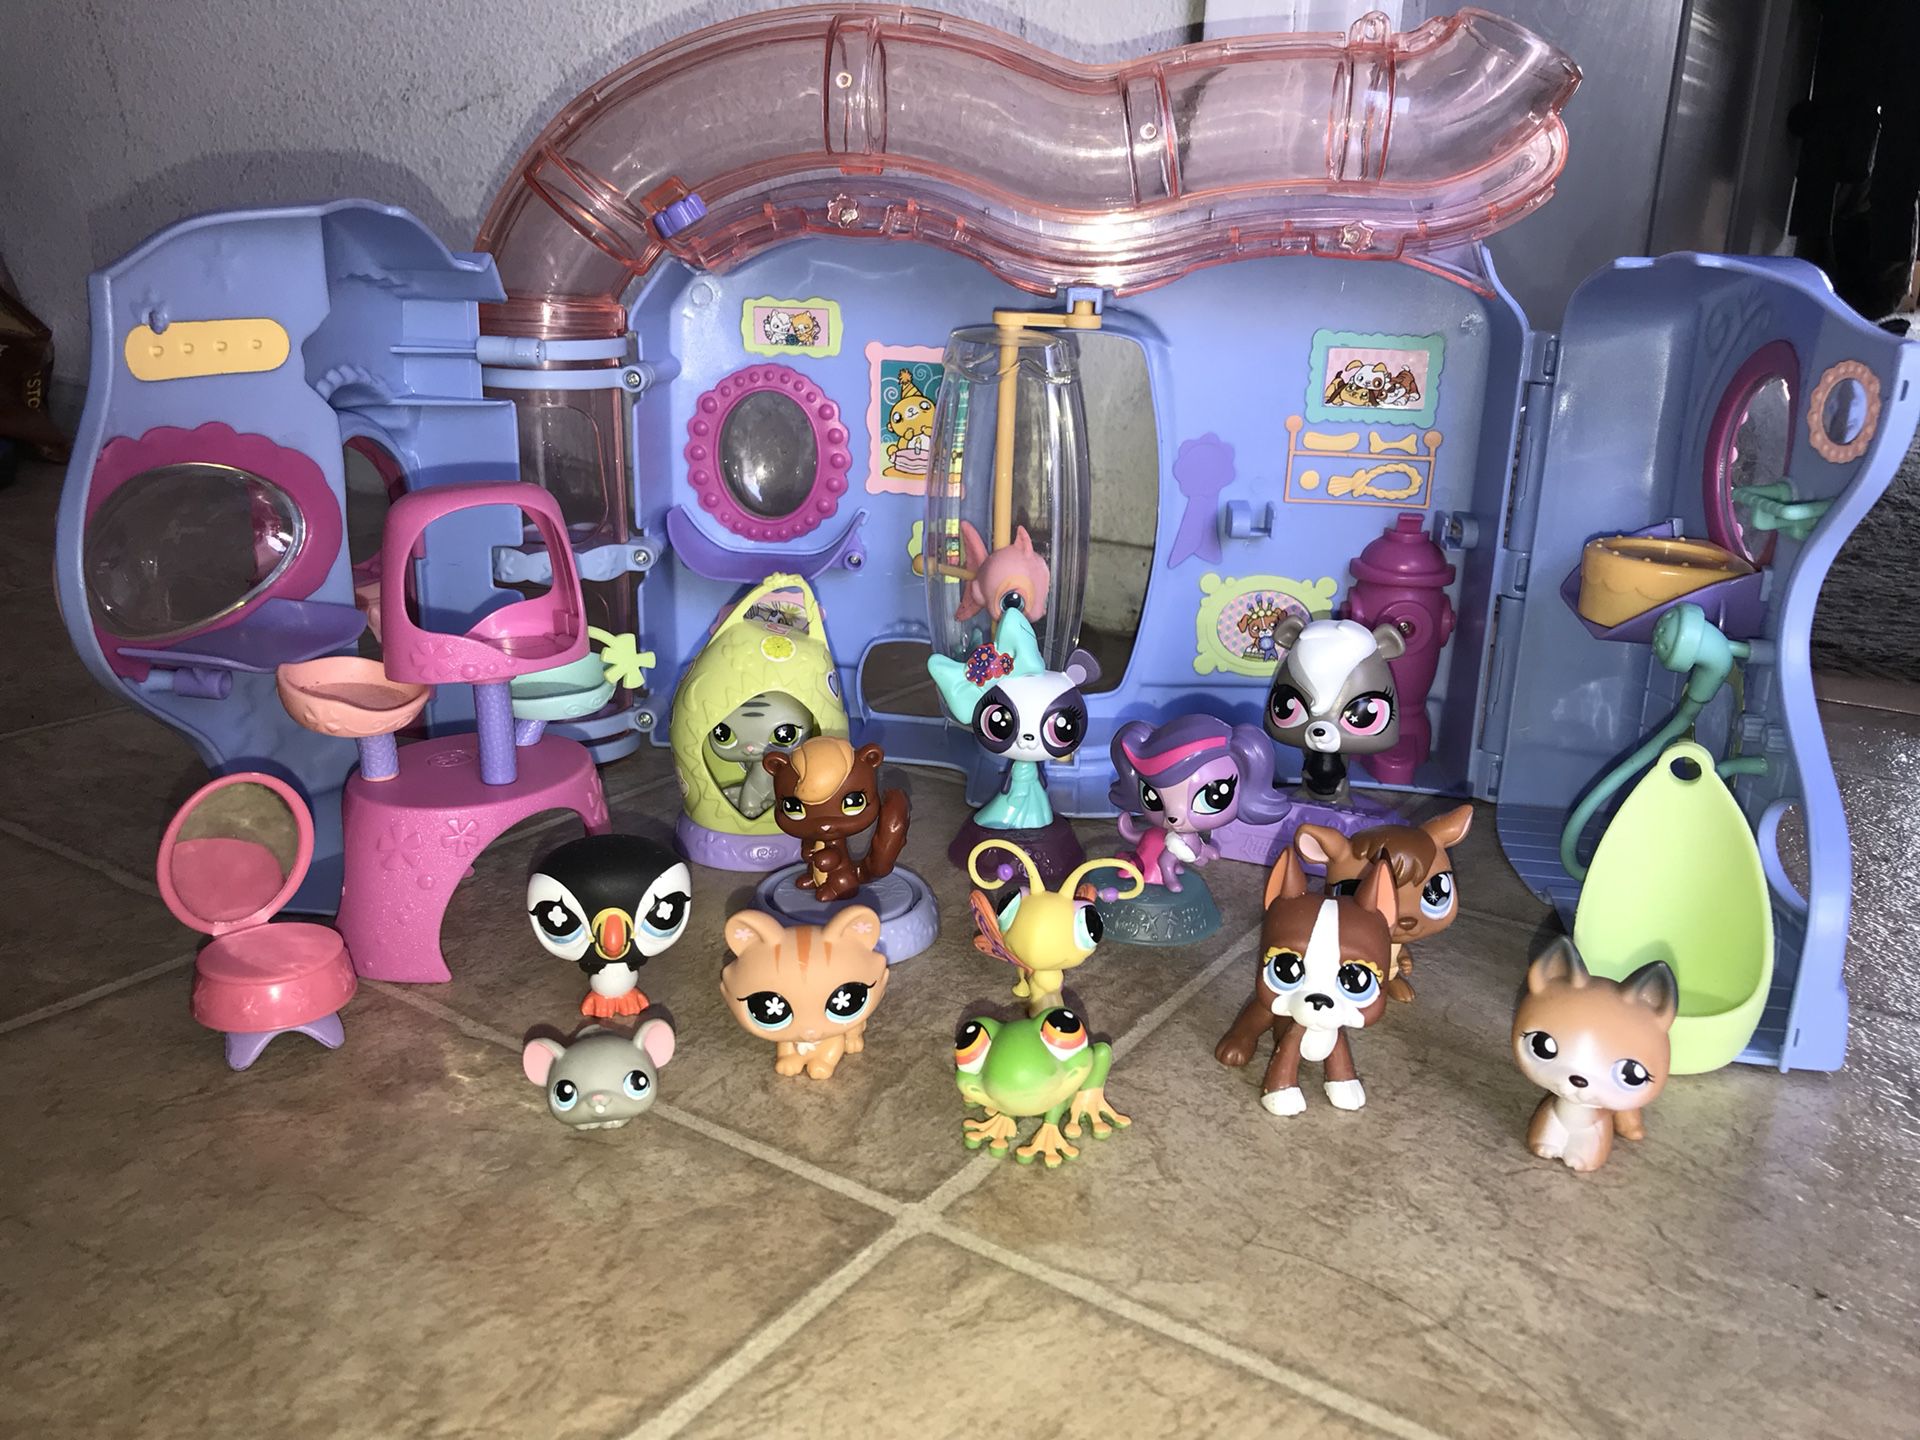 Lps House With 3 Lps. for Sale in Naples, FL - OfferUp